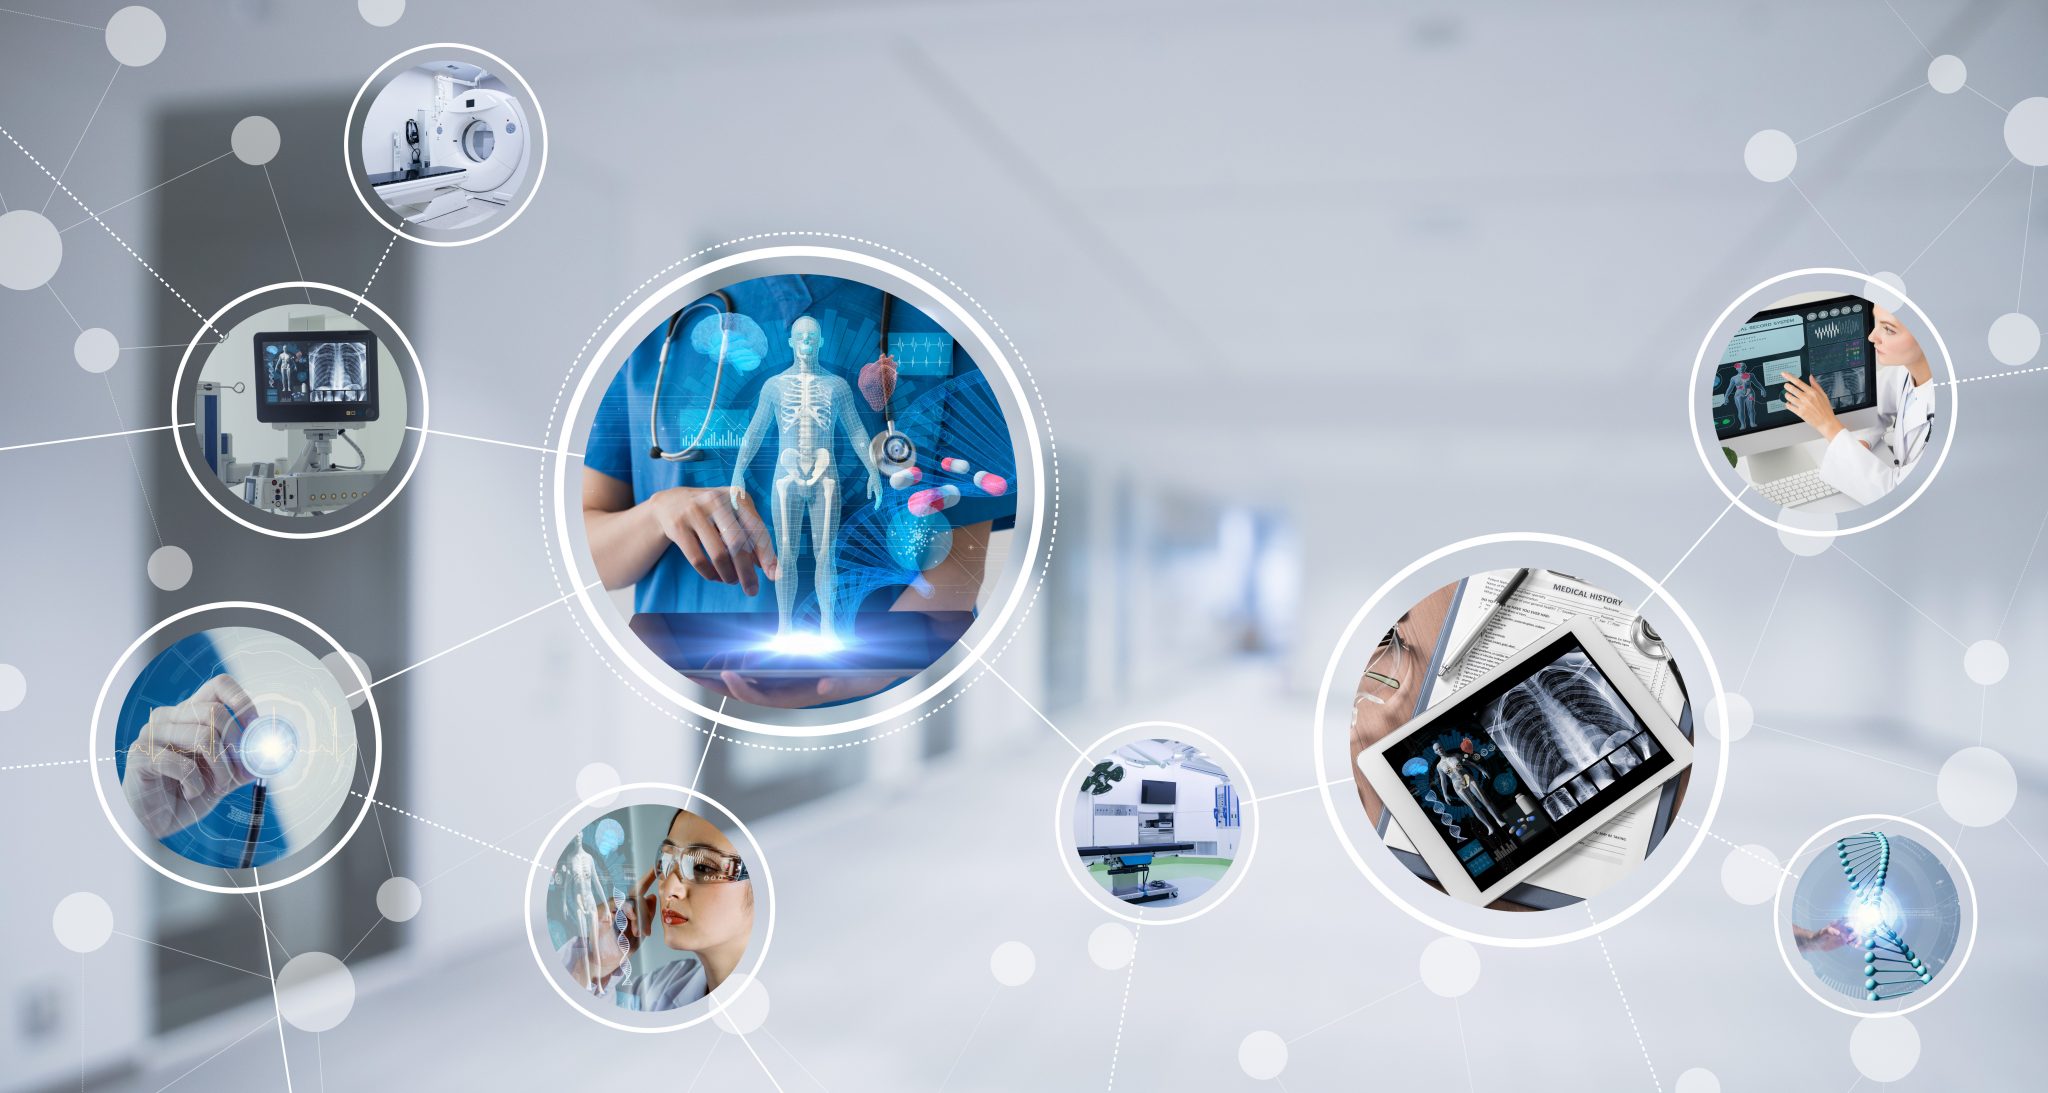 Health Care and IoT Security: Your Devices Need a Physical